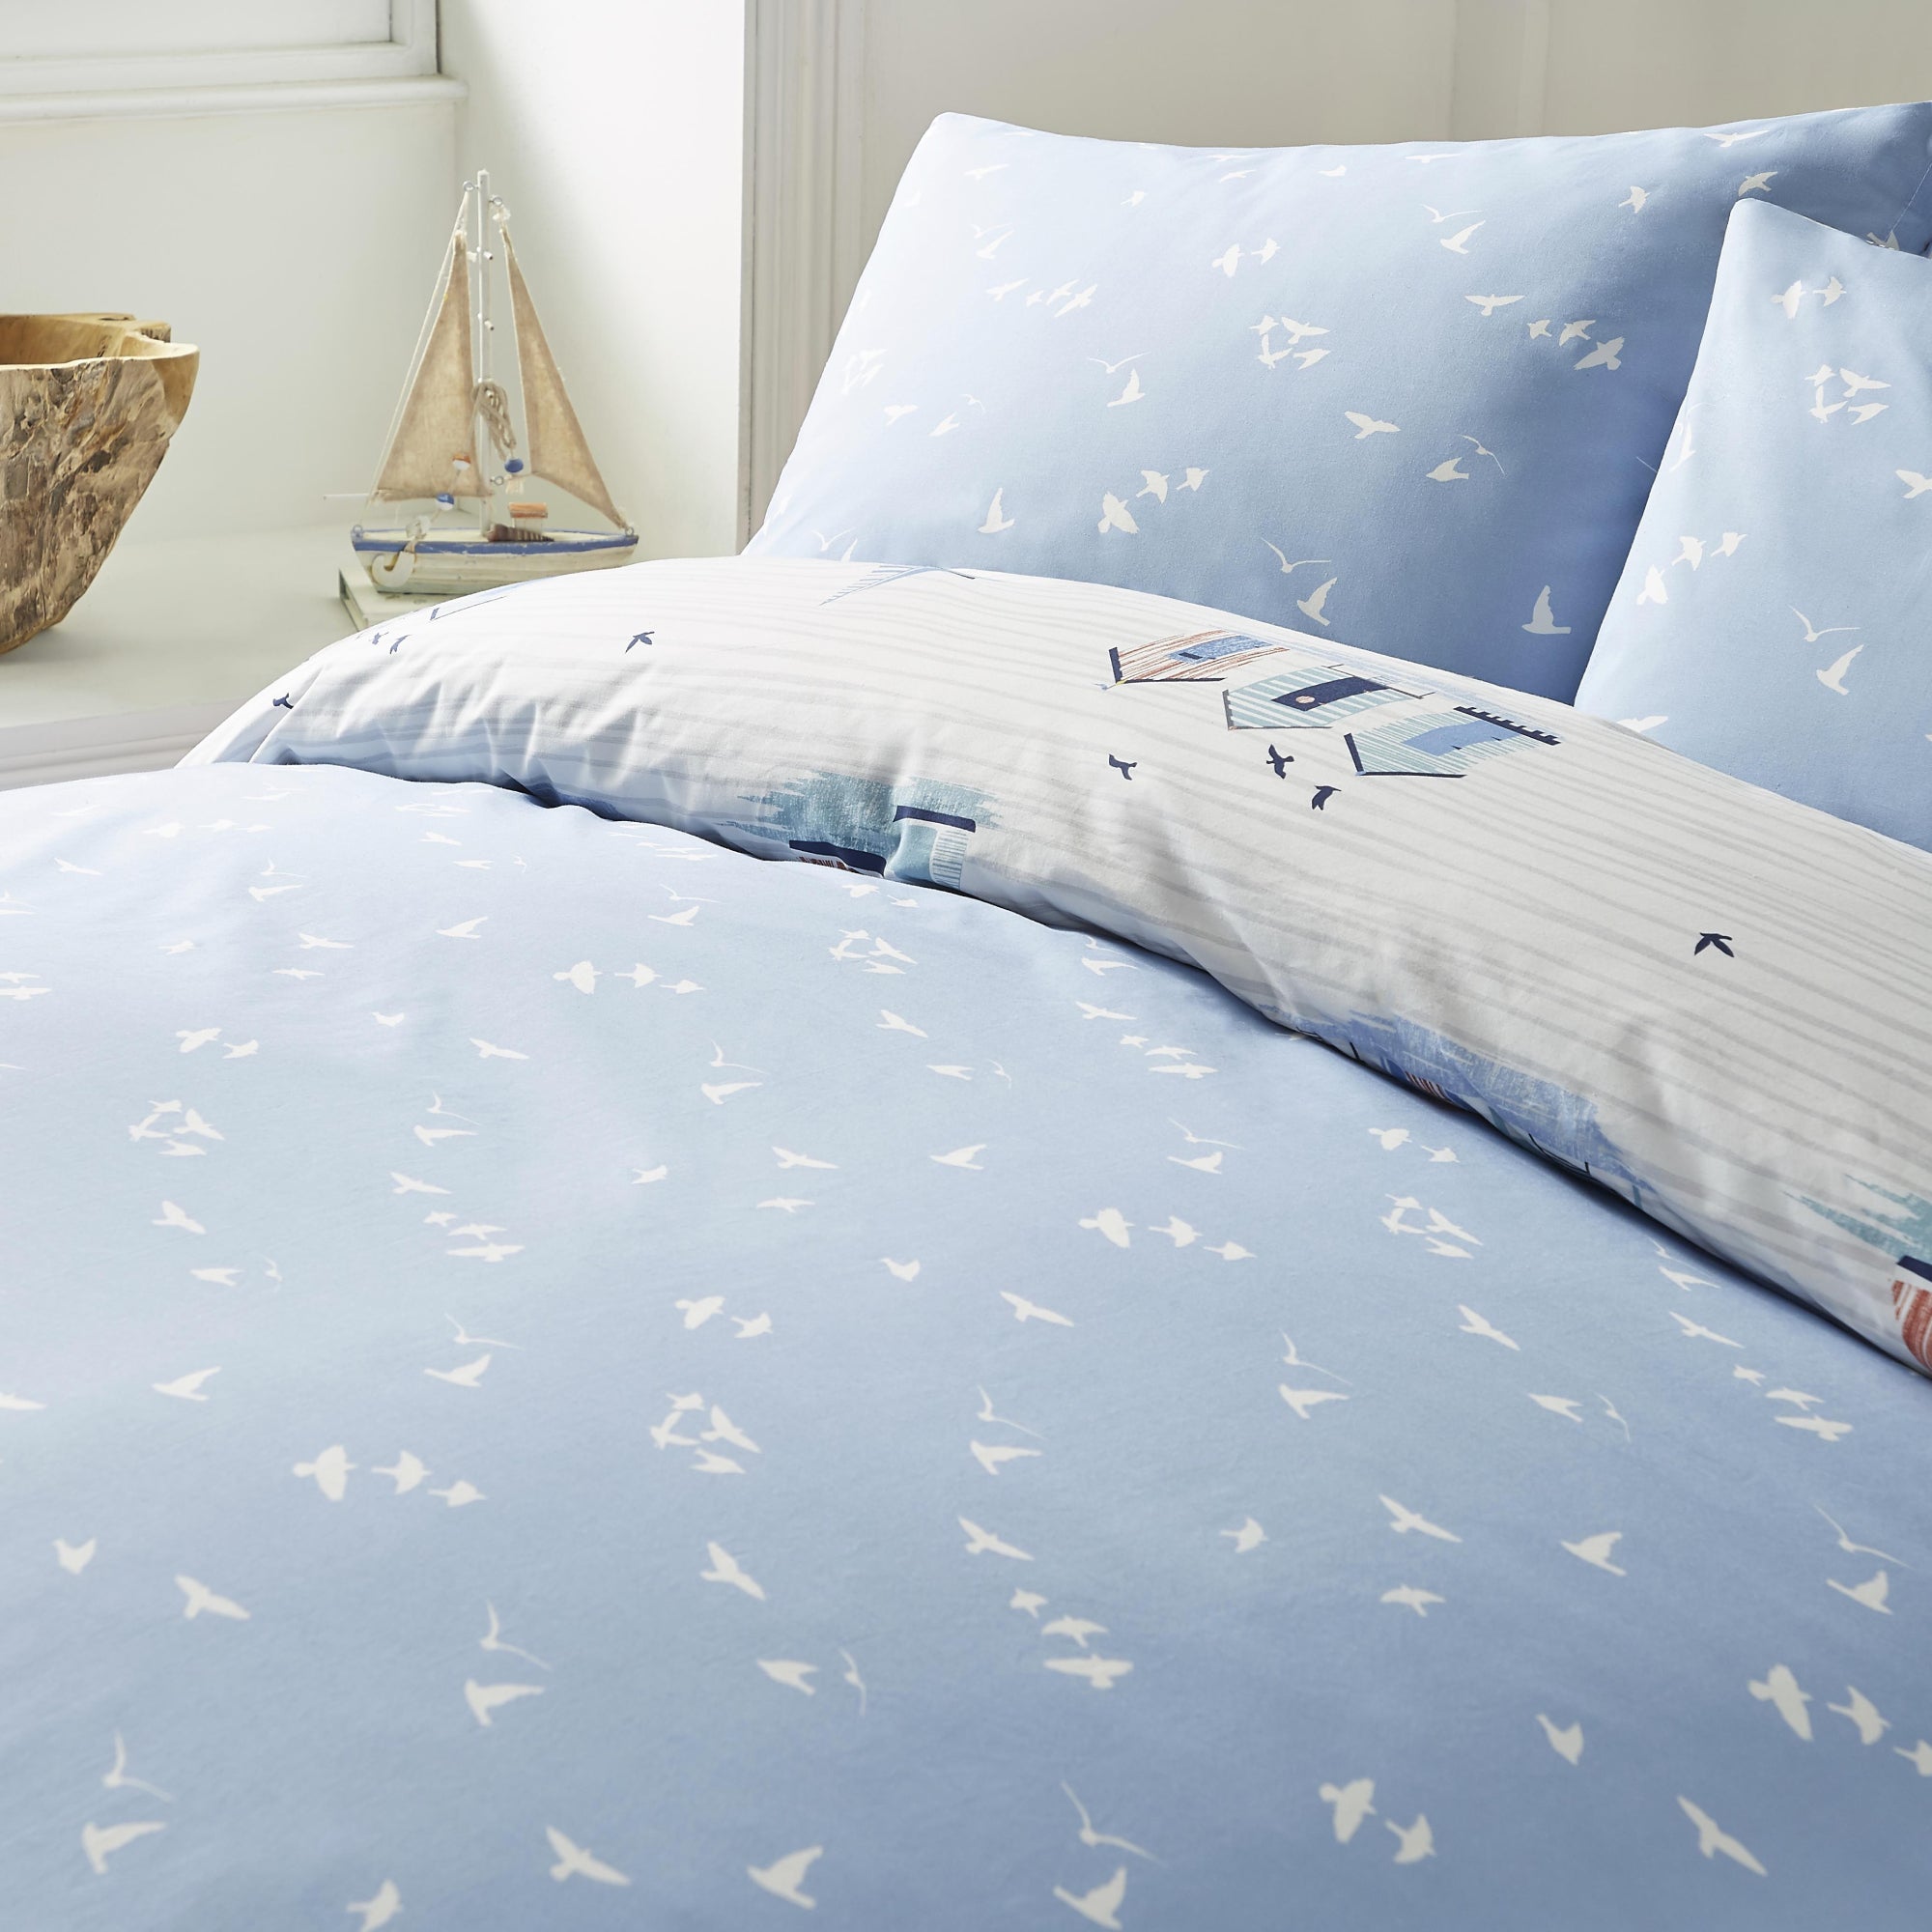 Duvet Cover Set Beach Huts by Fusion in Blue